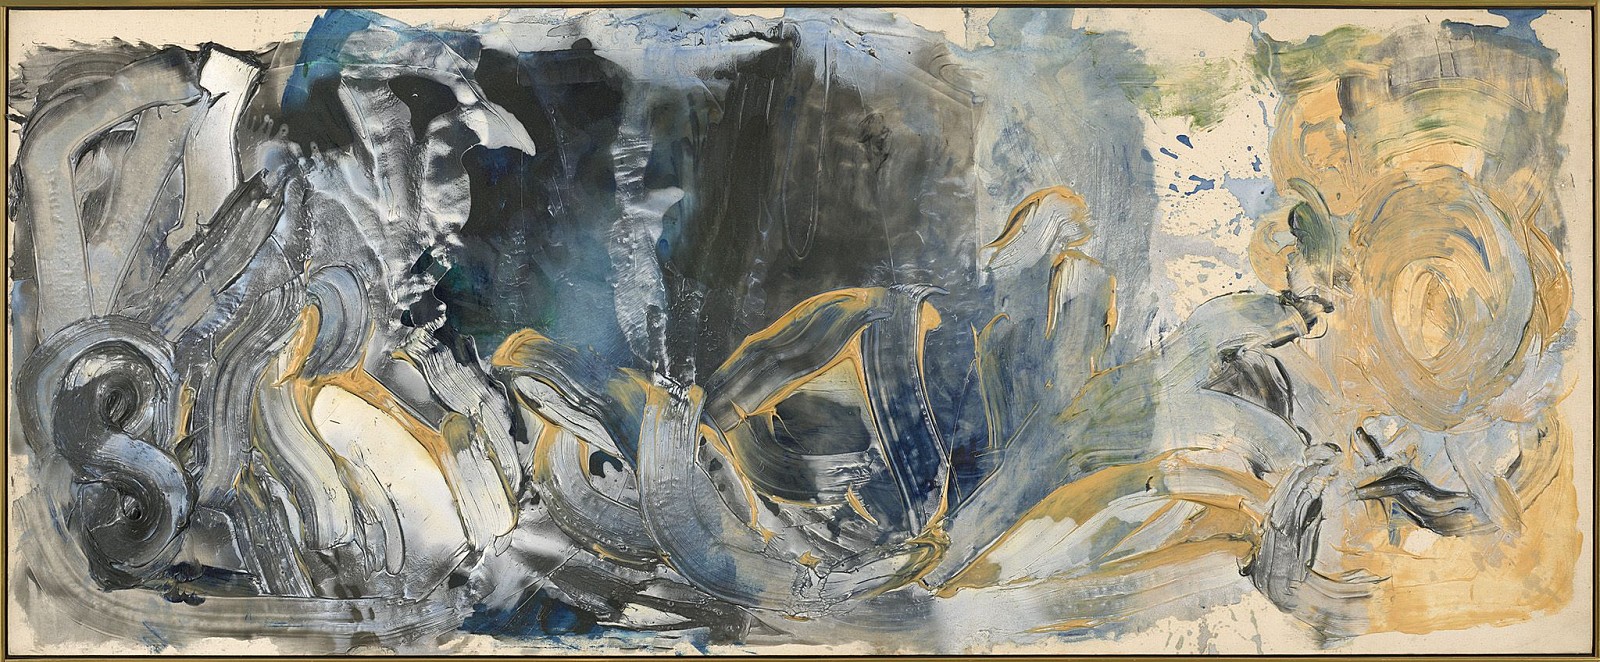 James Walsh, BENTHIC, 1986
Acrylic on panel, 46 x 113 in. (116.8 x 287 cm)
WAL-00072